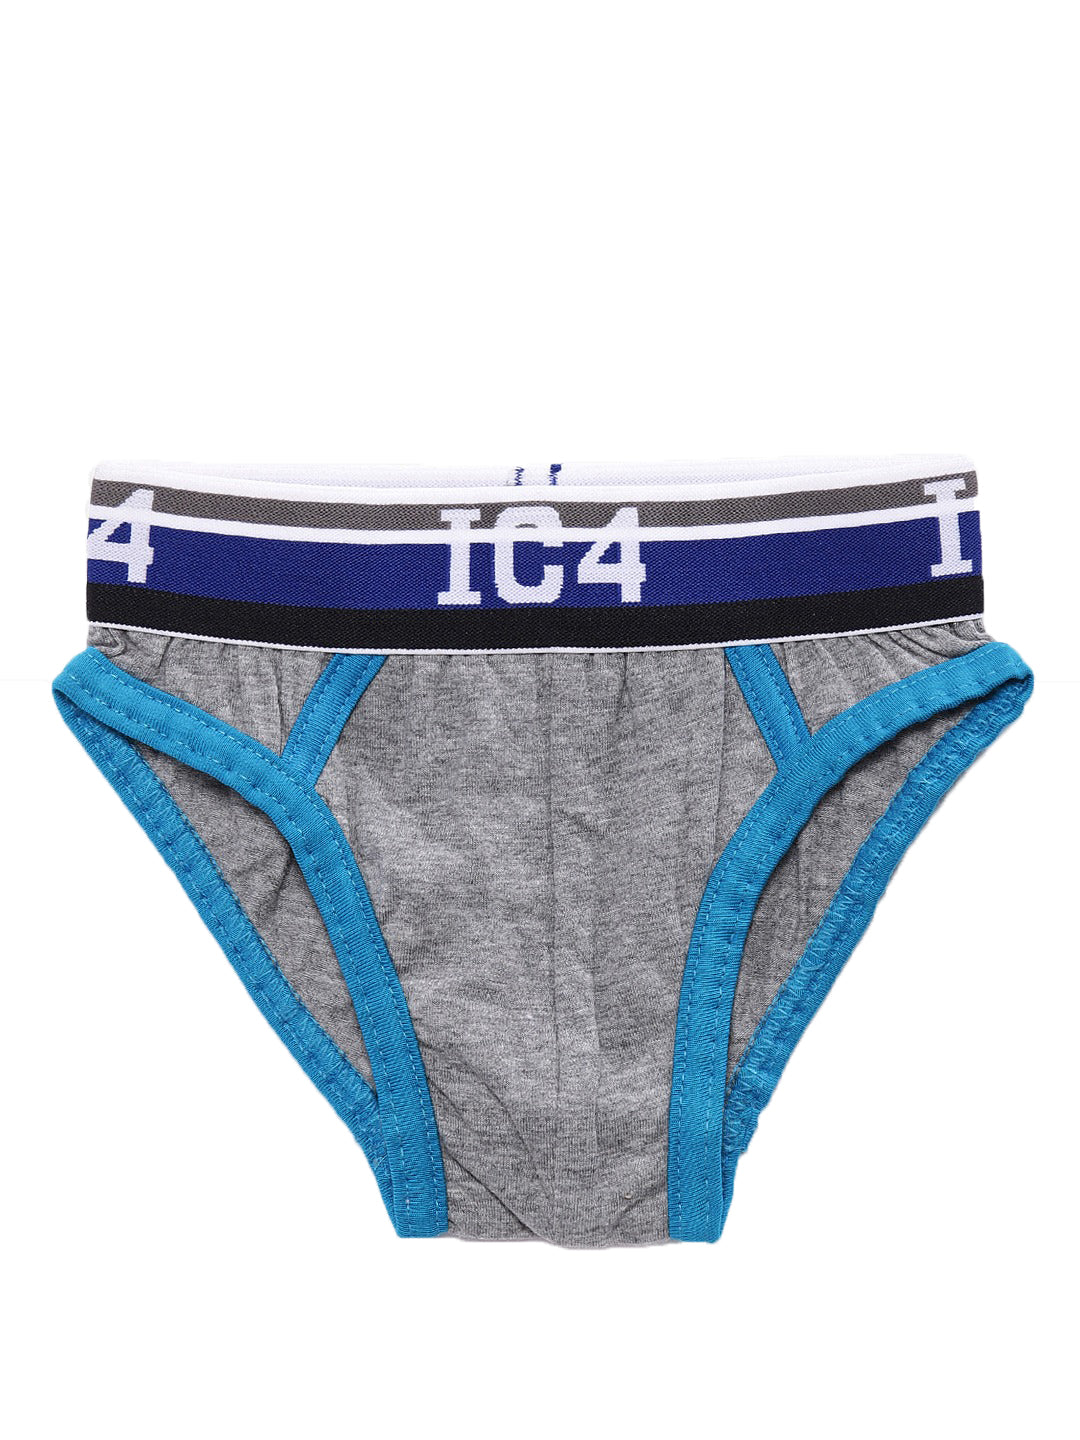 IC4 Boys Brief Grey Combo Pack of 3